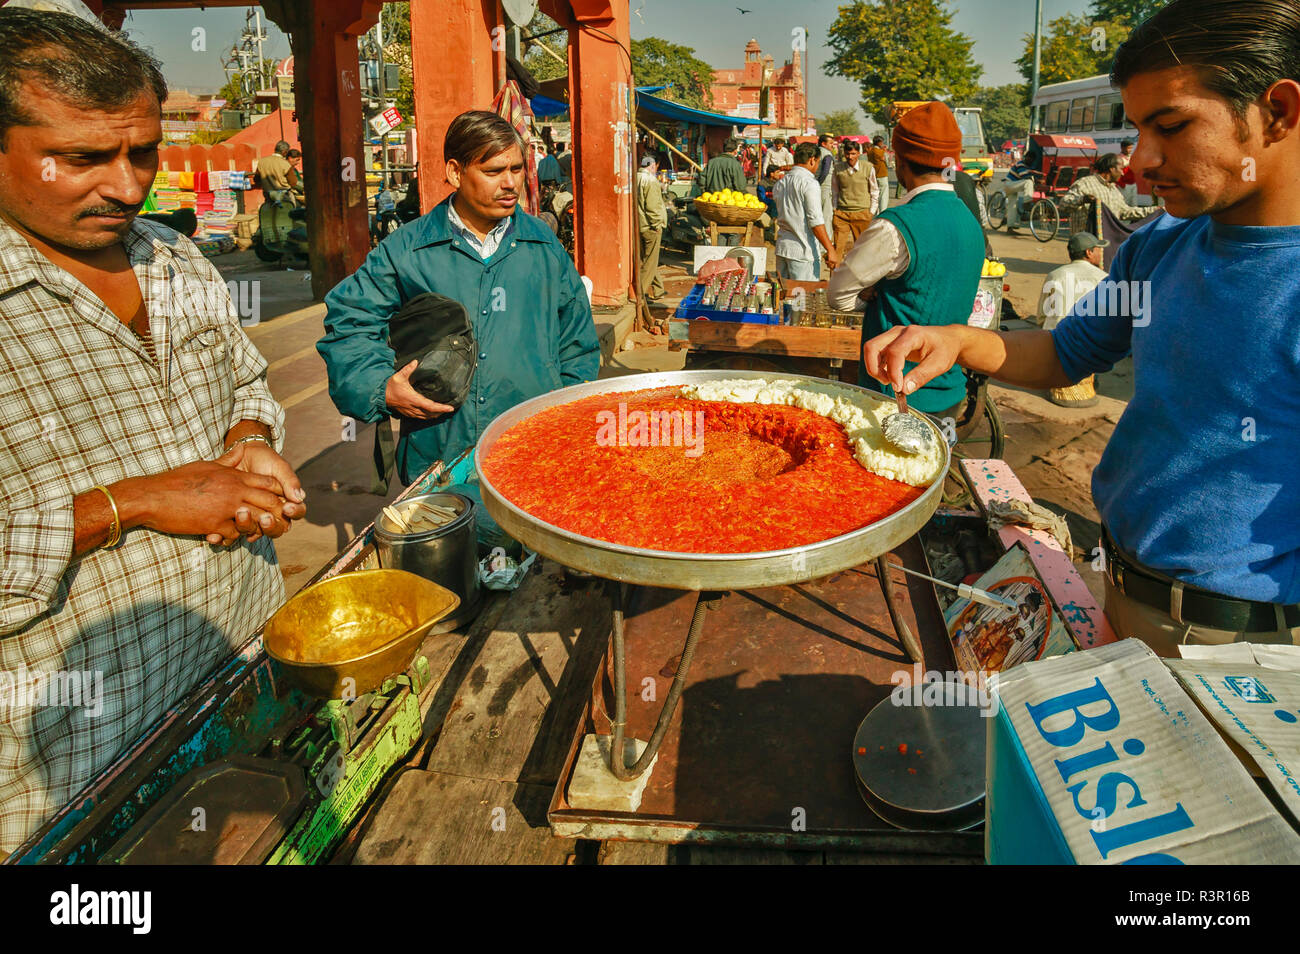 RAJASTHAN JAIPUR  INDIA FOOD PREPARATION AND COOKING IN THE STREET Stock Photo